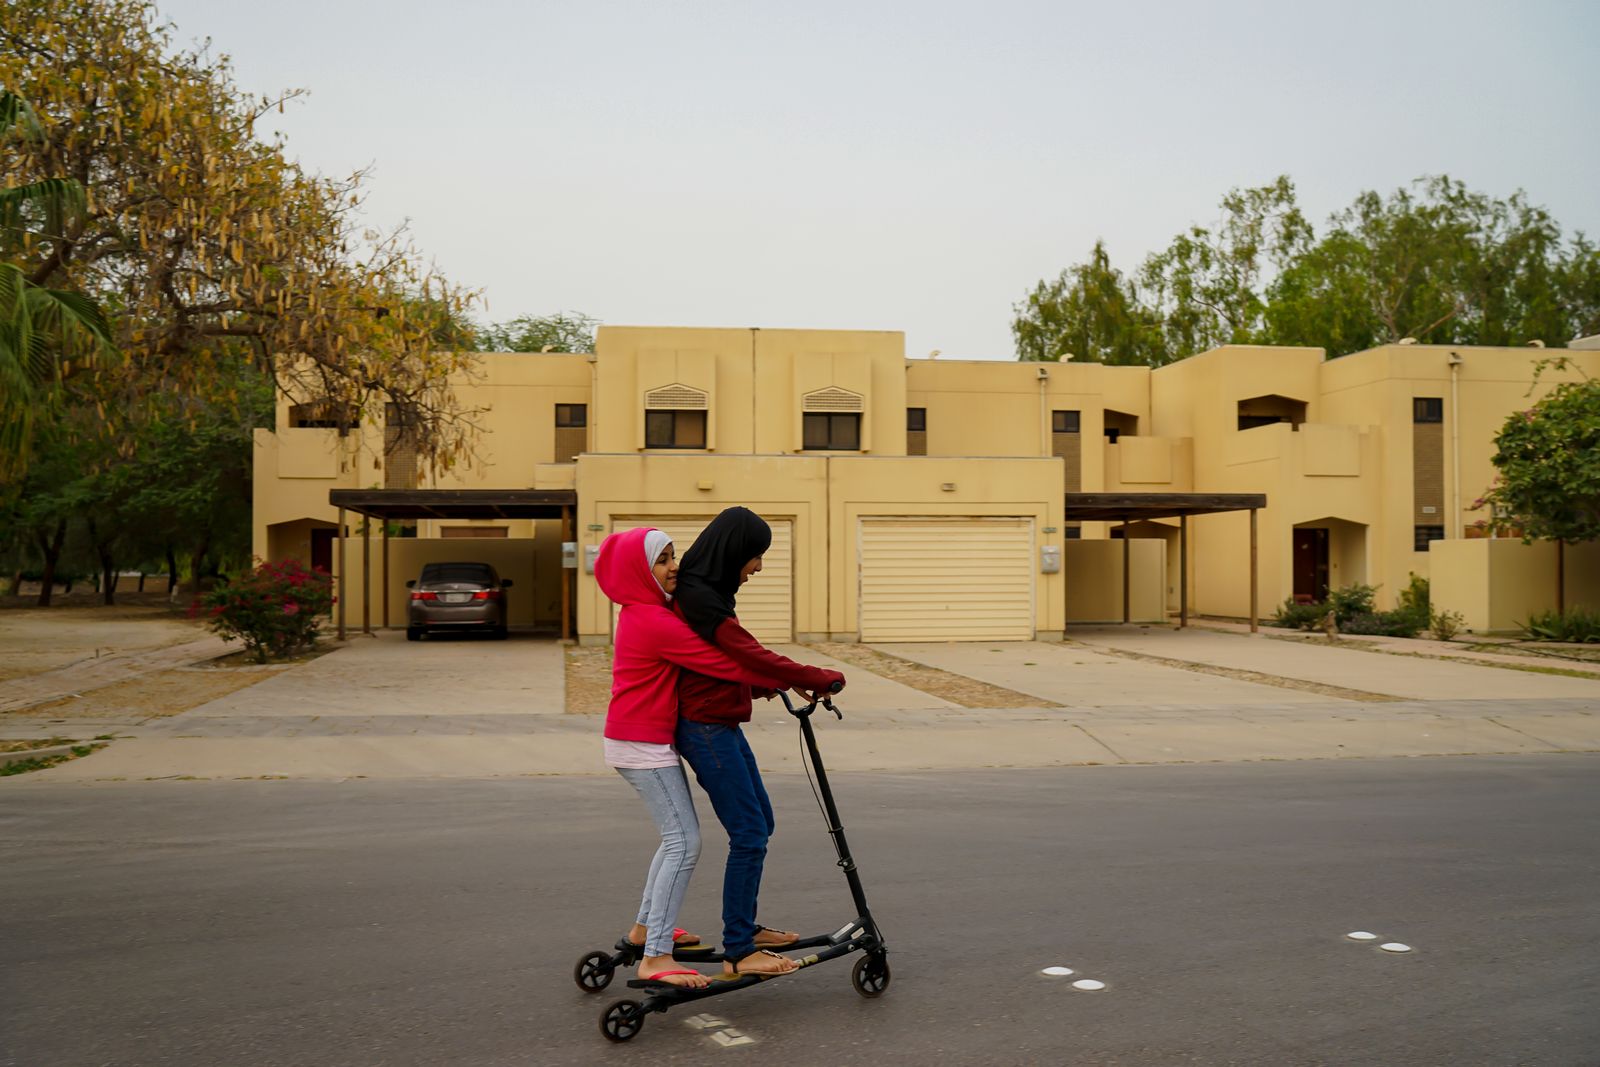 © Tasneem Alsultan - We can't drive, but we can scooter.